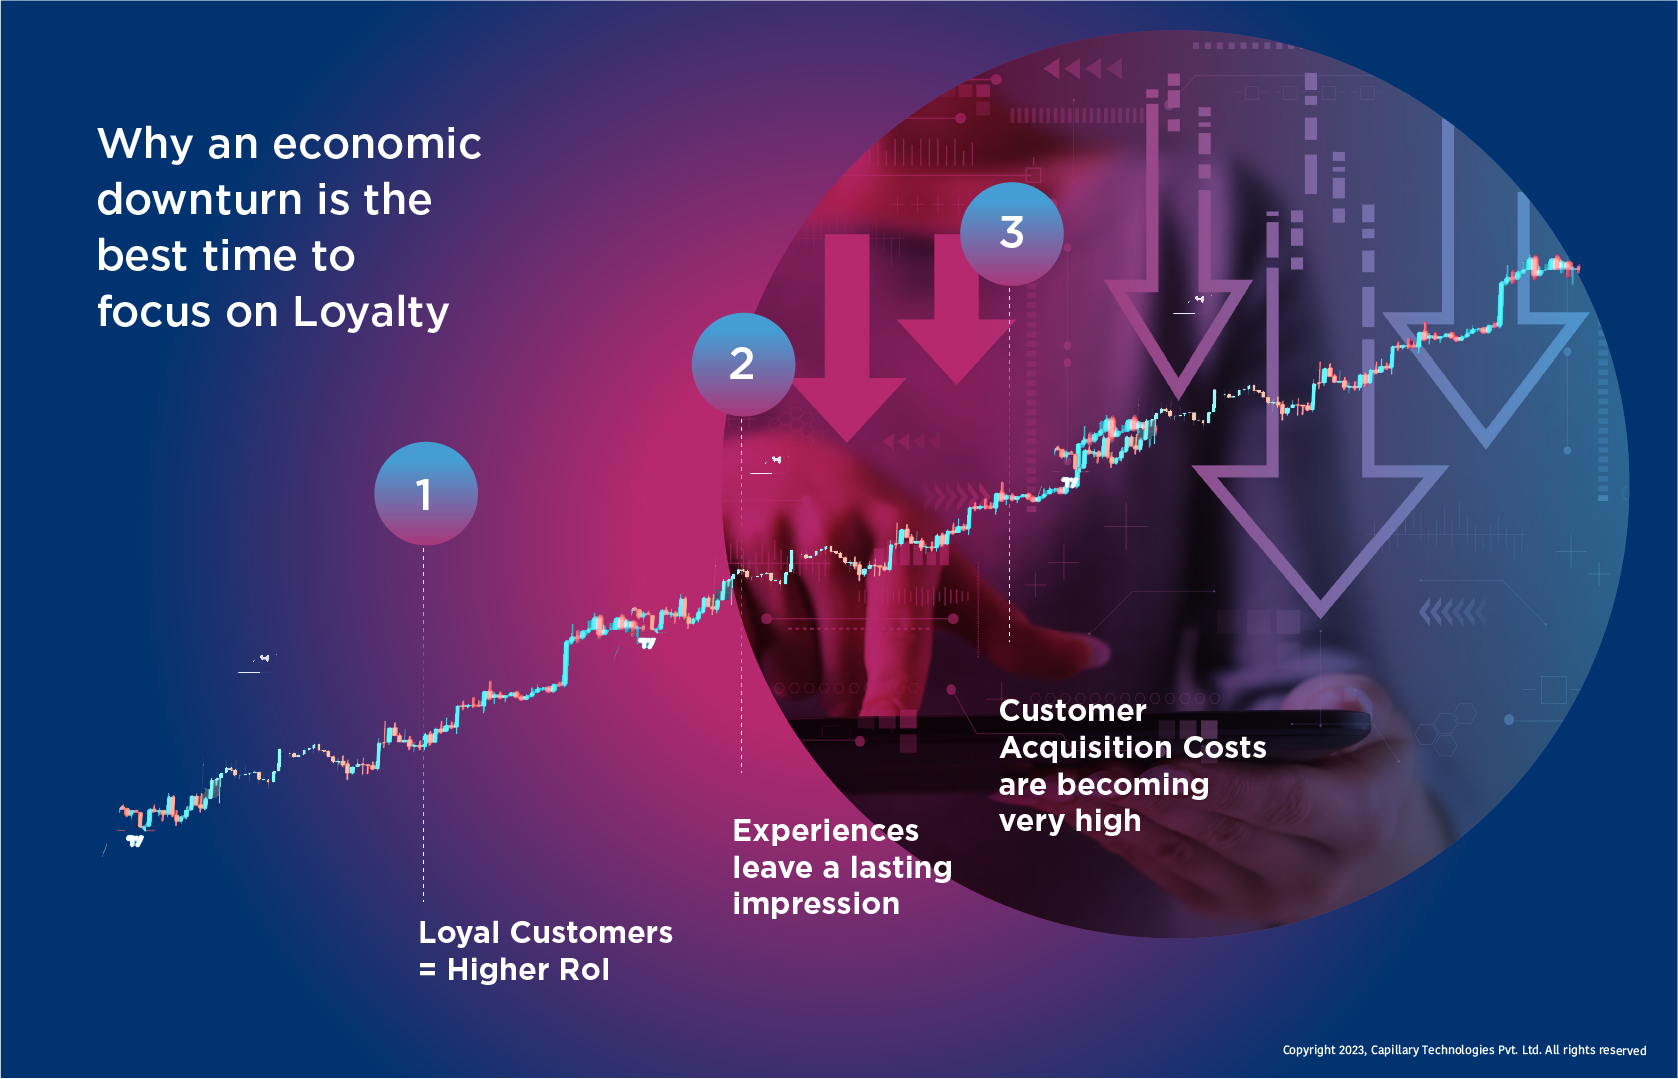 Why an economic downturn is the best time to focus on Loyalty